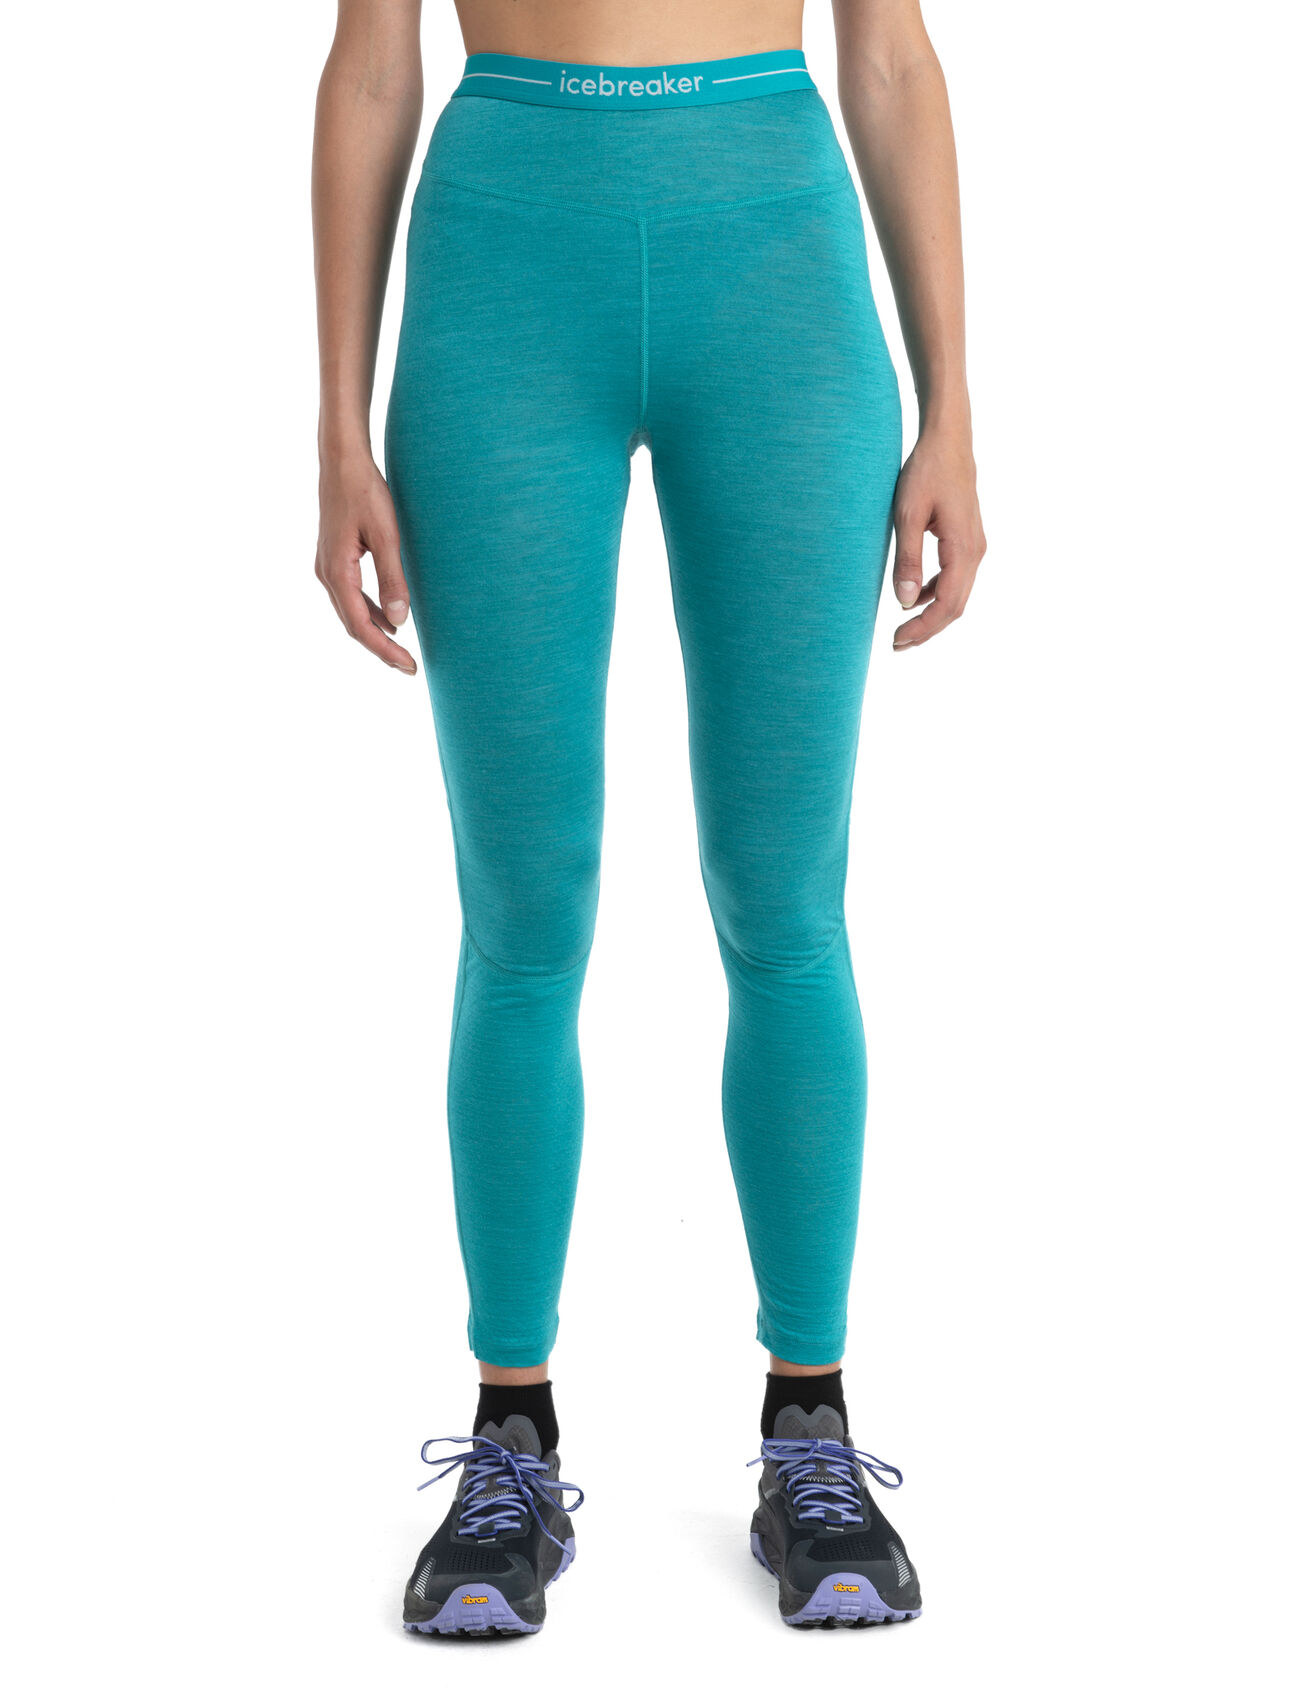 Womens 125 ZoneKnit™ Merino Thermal Leggings Ultralight merino base layer bottoms designed to help regulate body temperature during high-intensity activity, the 125 ZoneKnit™ Leggings feature our jersey Cool-Lite™ fabric for adventure and everyday training.